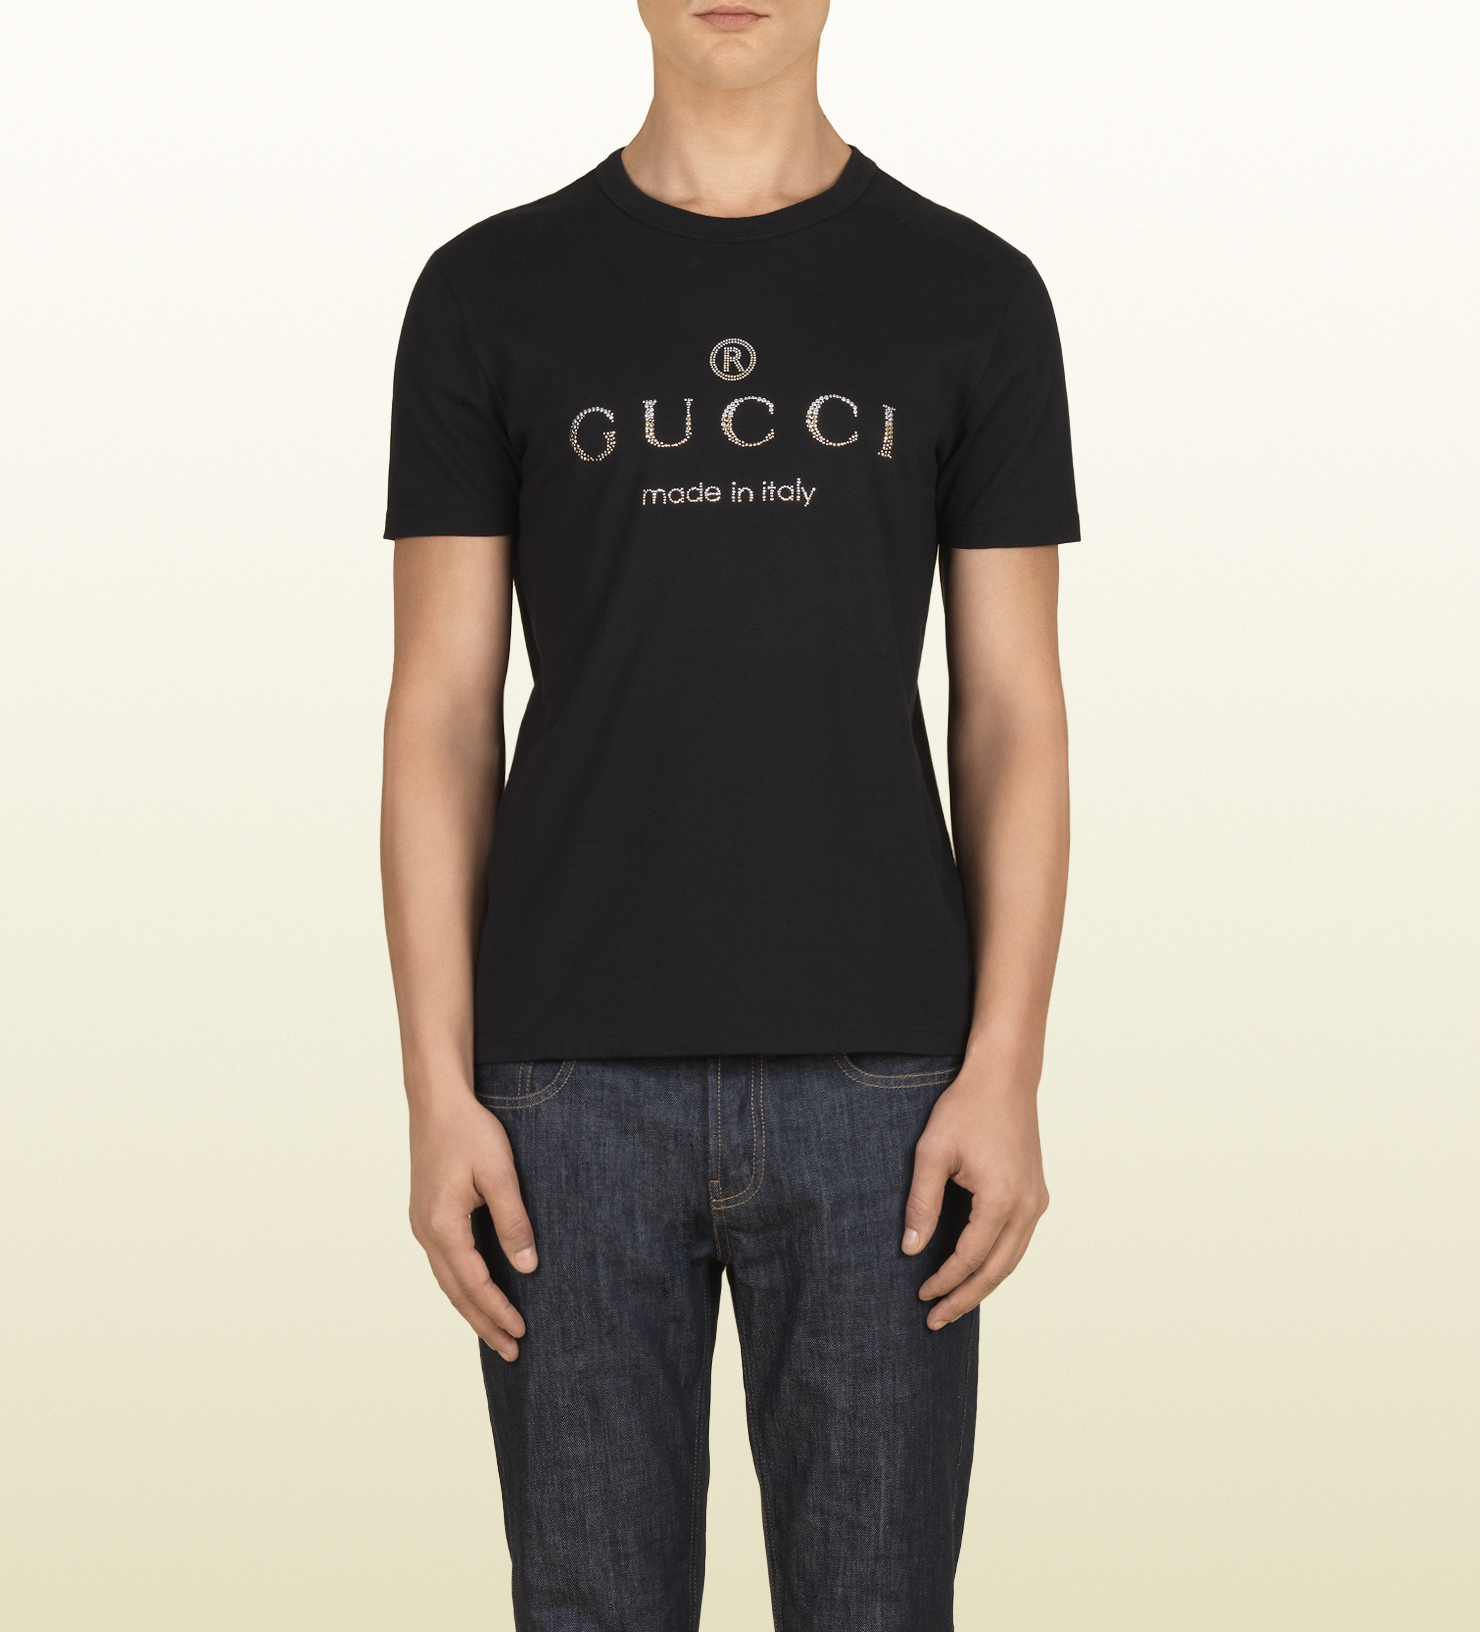 Gucci Black Crew Neck Tshirt with Logo for Men - Lyst